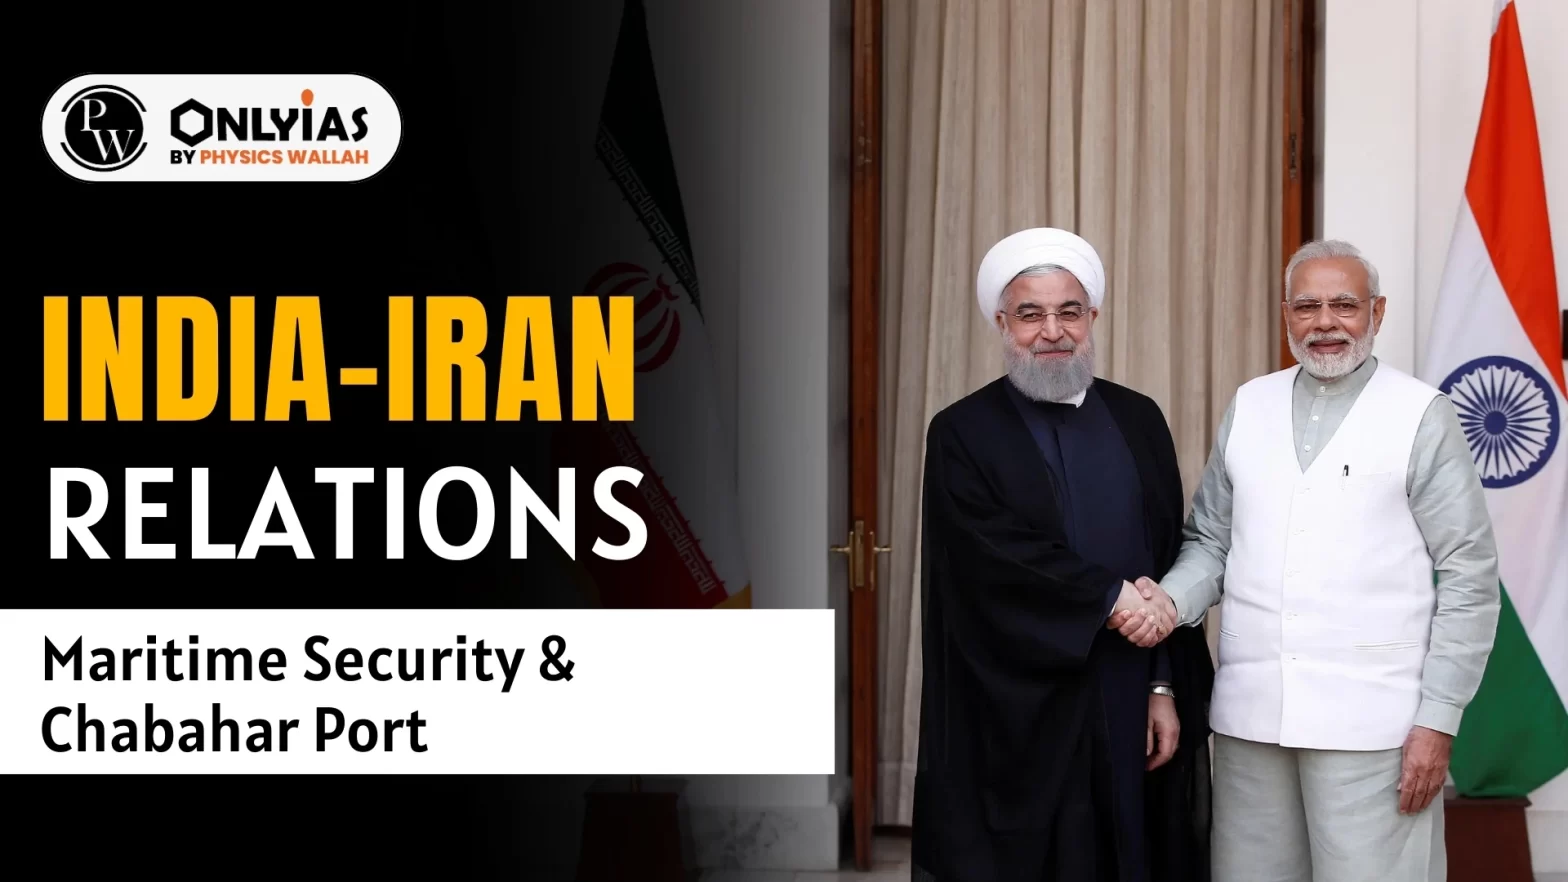 India-Iran Relations: Maritime Security & Chabahar Port